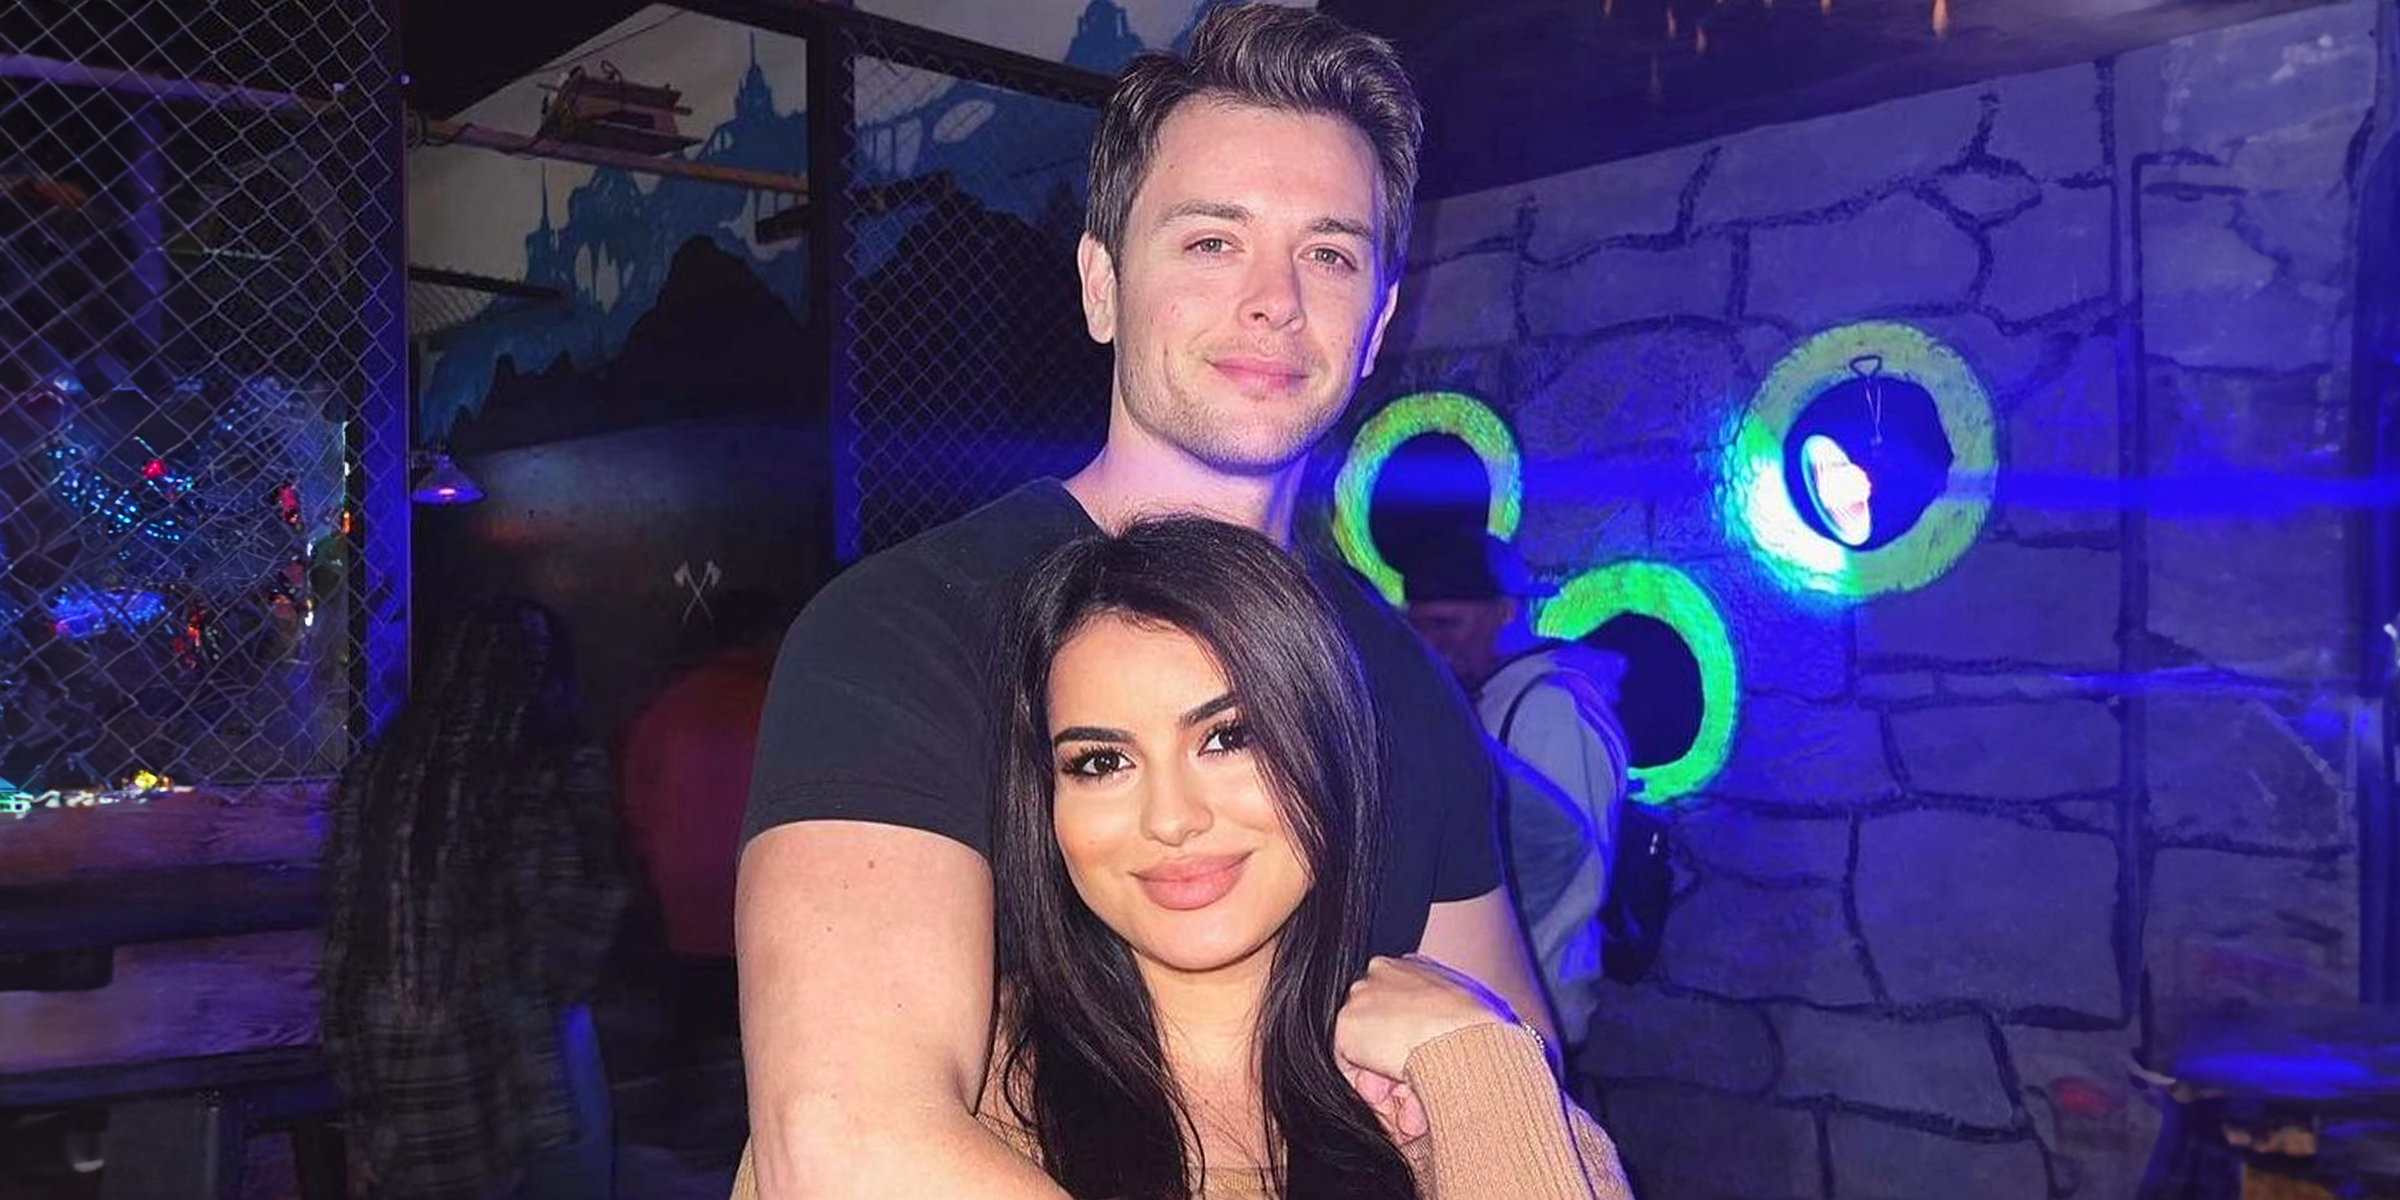 Chad Duell and Luana Lucci | Source: Instagram/duelly